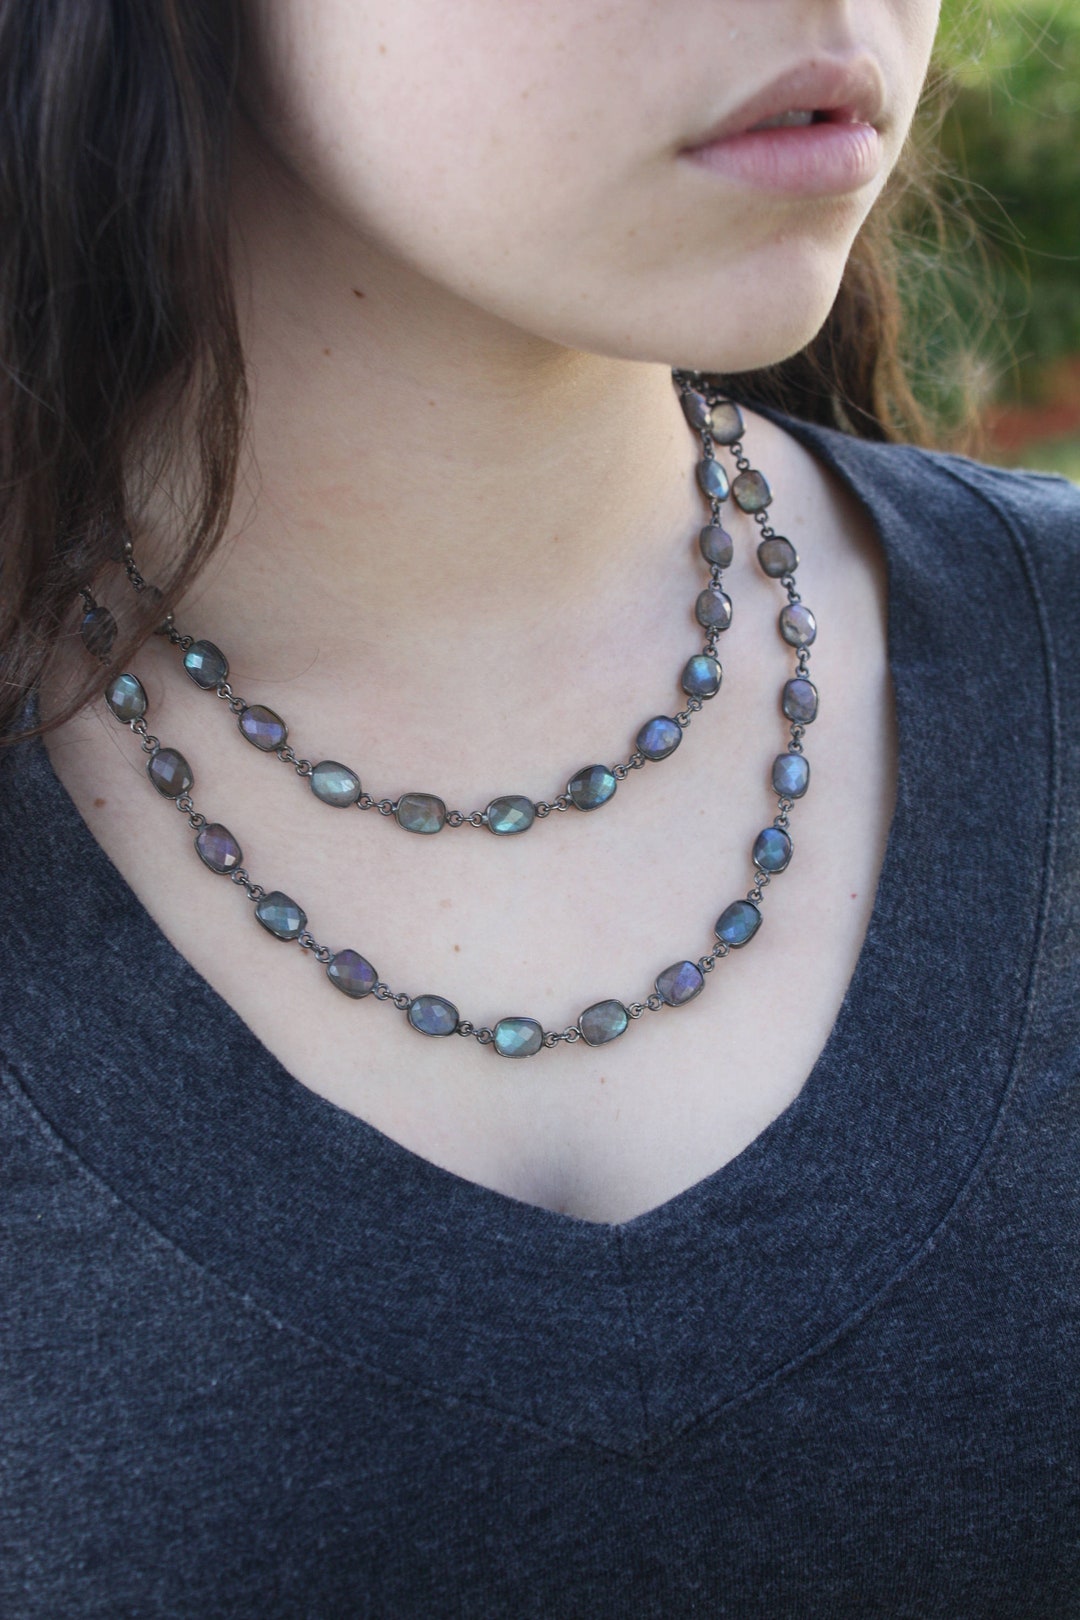 Layered Necklaces - Multi-Strand Designs For A Chic Look - Lovisa